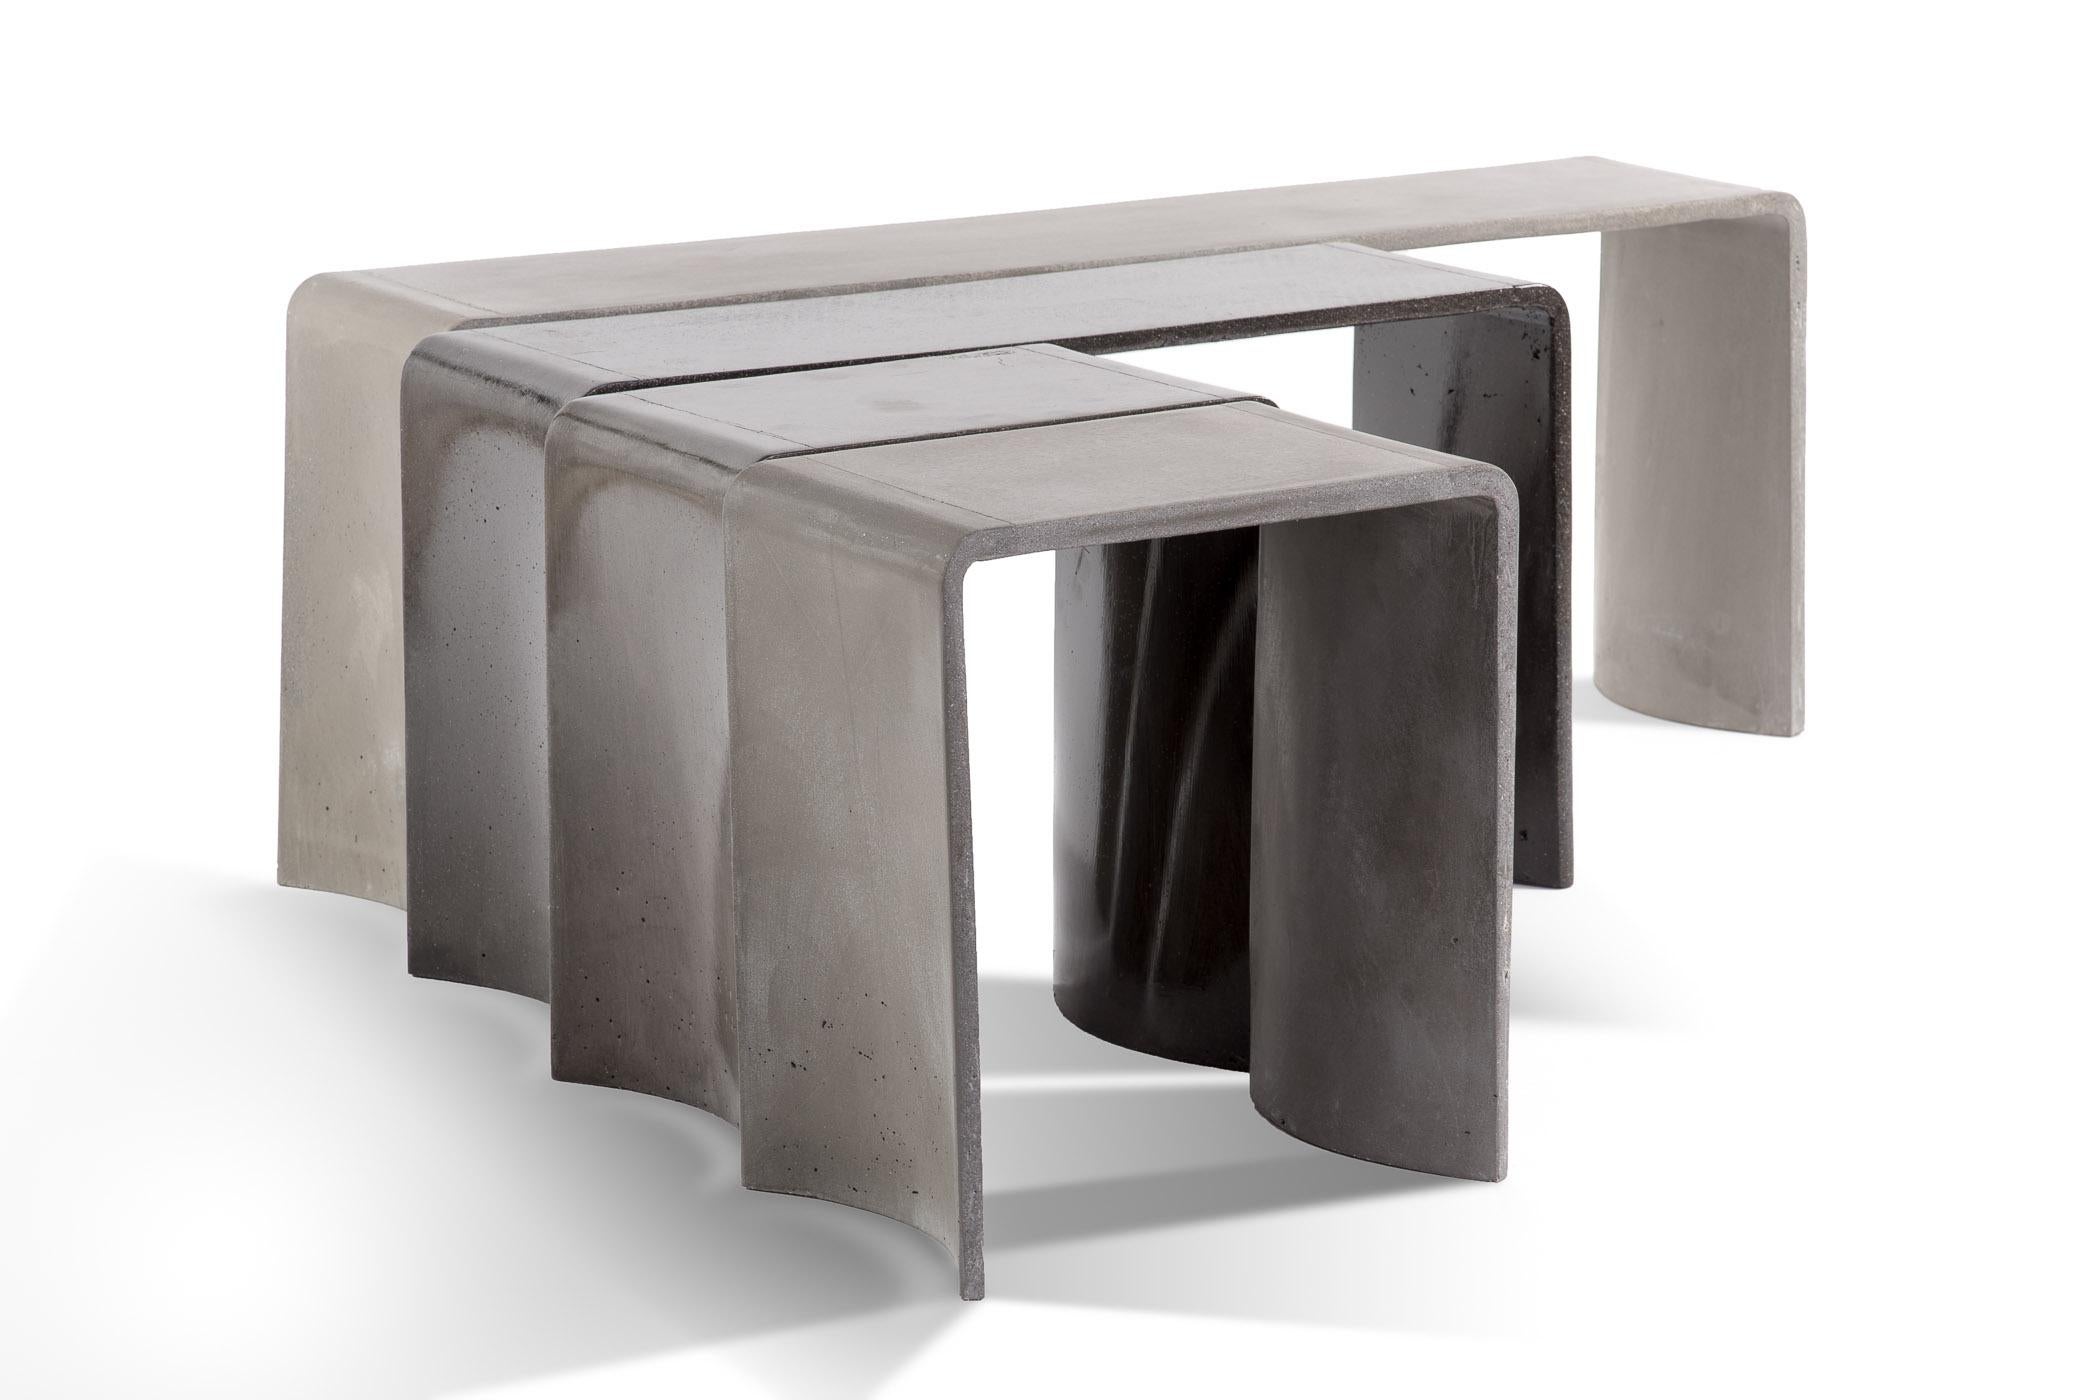 Tadao 120 Concrete Contemporary Low Console Table, 100% Handcrafted in Italy (Moderne) im Angebot